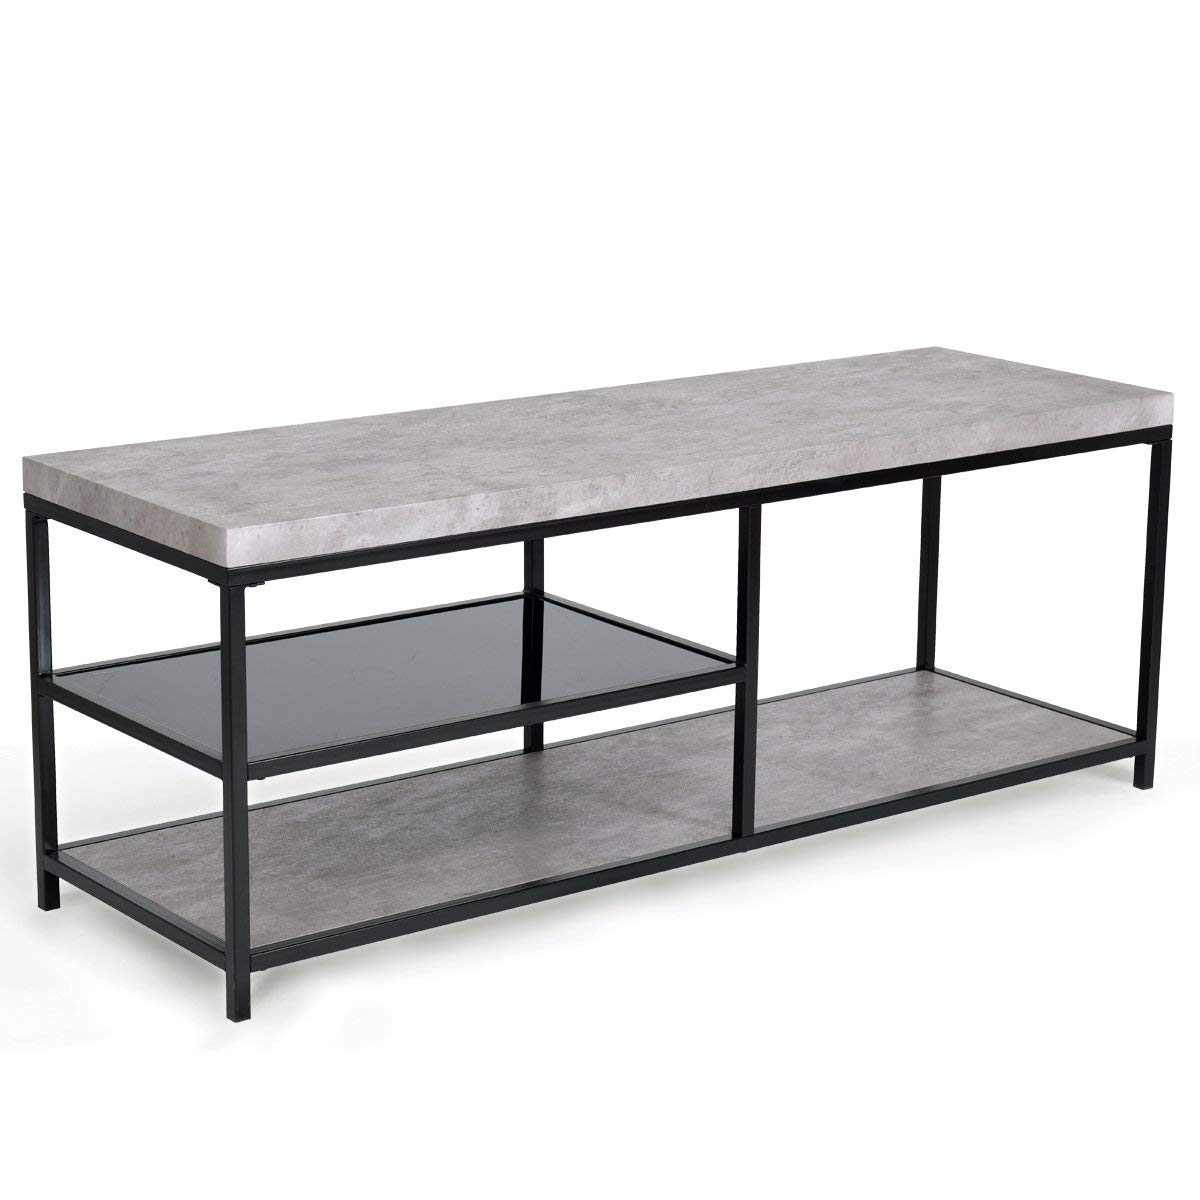 giantex accent modern coffee table living room glass tables industrial style metal frame tempered middle shelf sofa side rectangular cocktail gray wine rack bbq console hallway